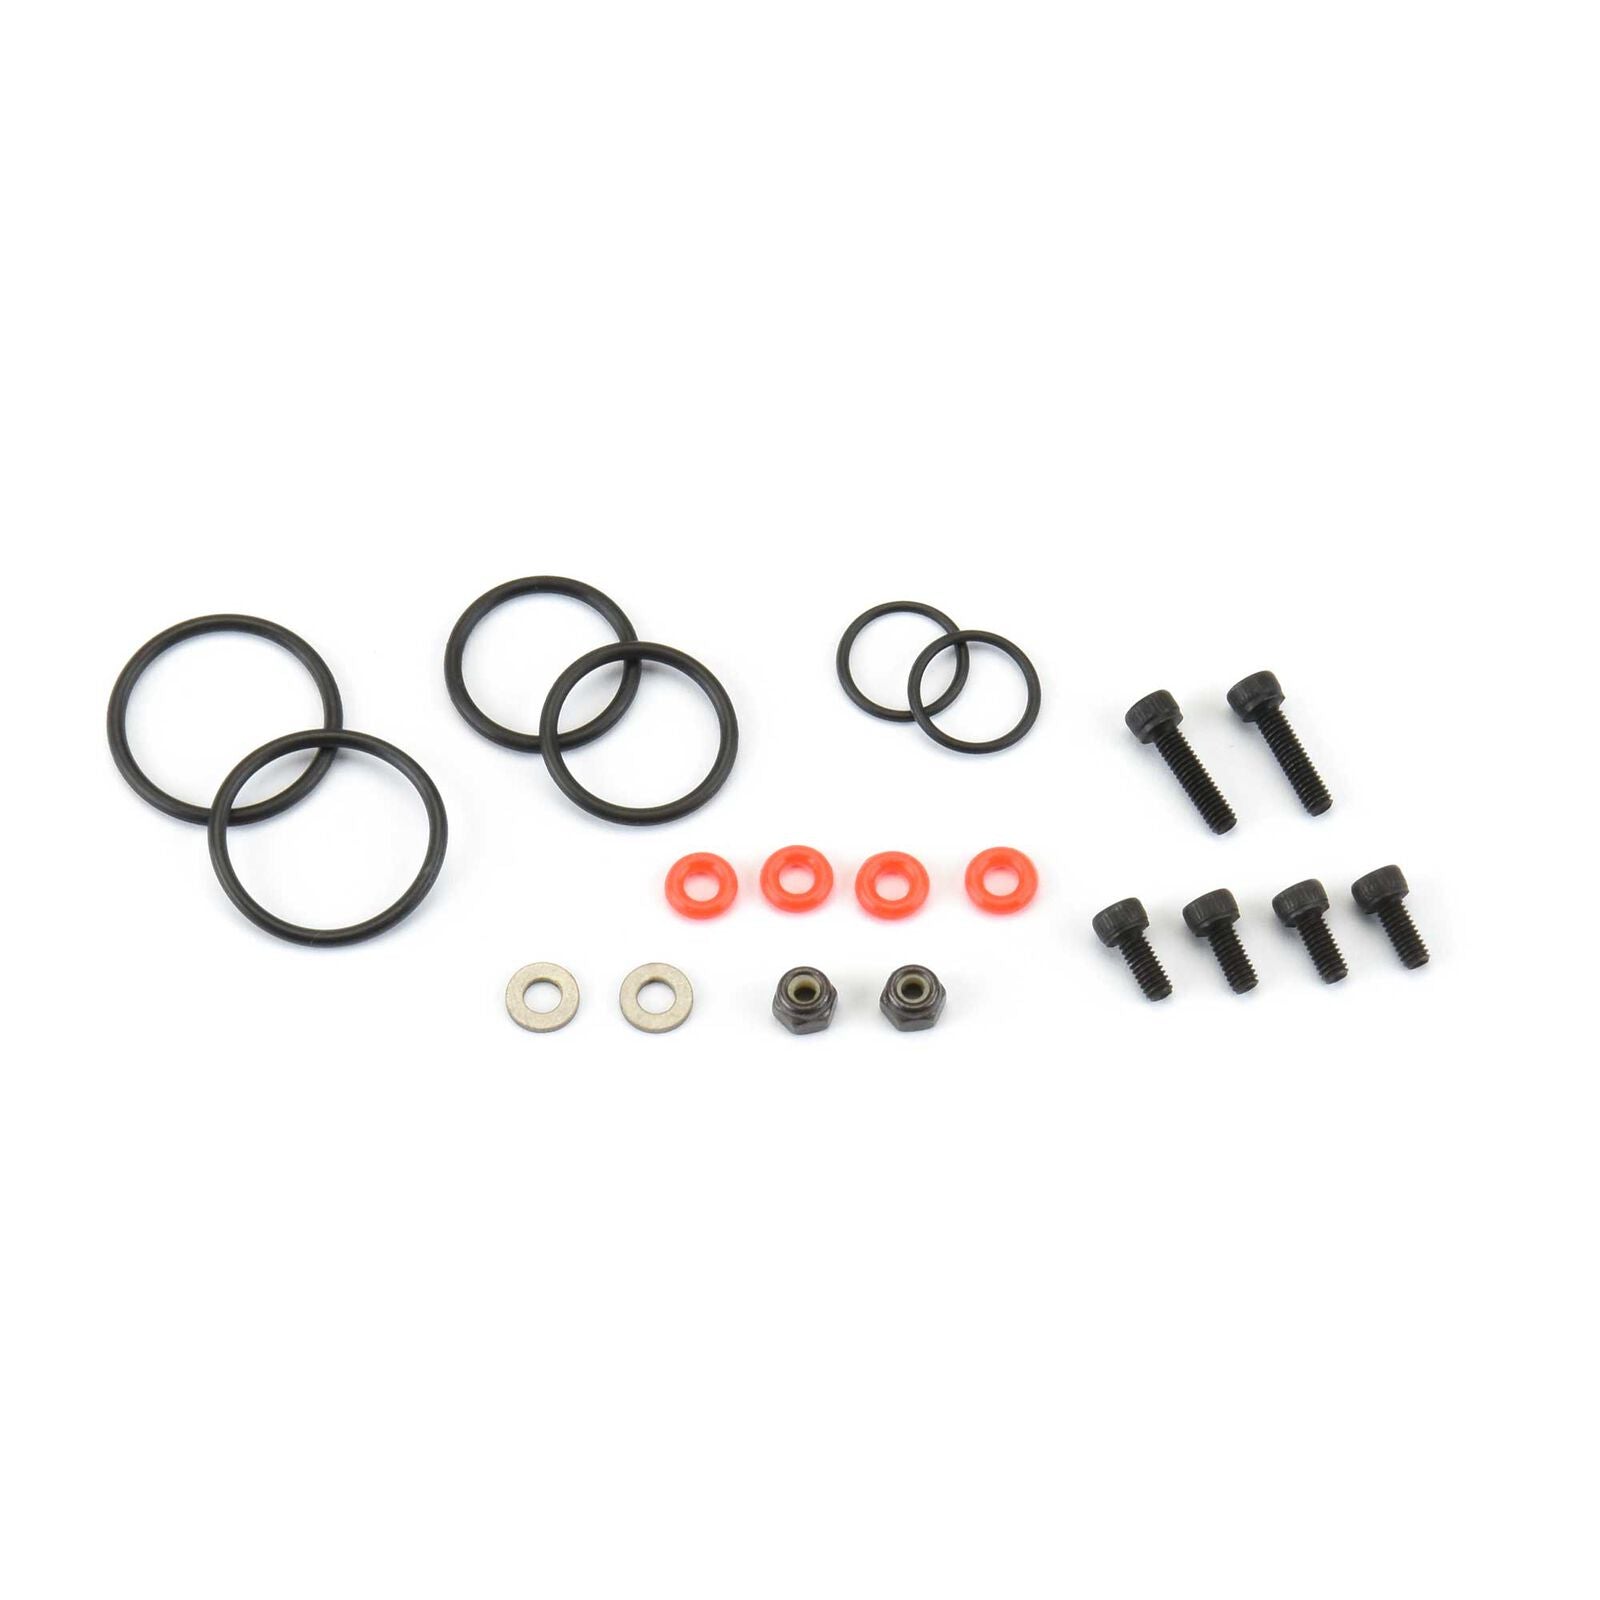 PROLINE 6359-02 O-Ring Replacement Kit Power Stroke 6359-00 / 6359-01